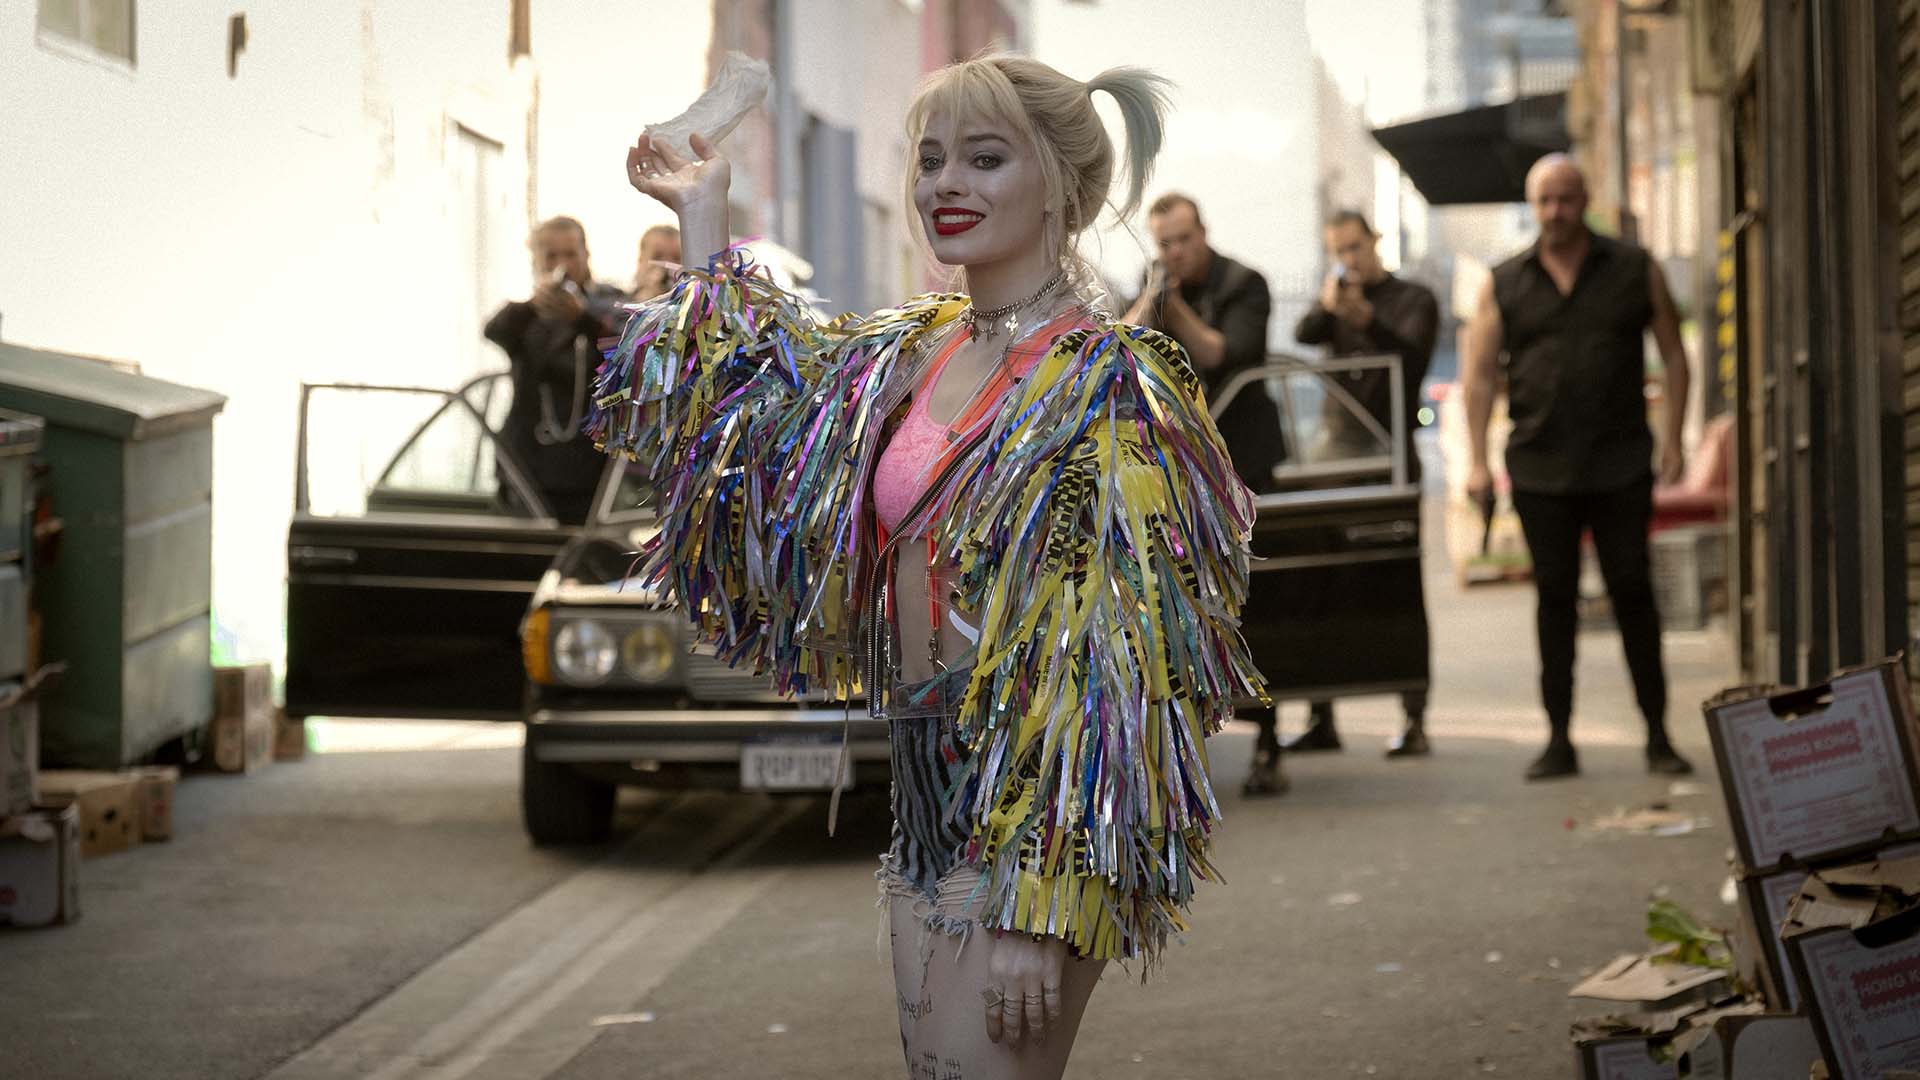 Margot Robbie's Harley Quinn Serves Up Colourful Crime Chaos in the New Trailer for 'Birds of Prey'